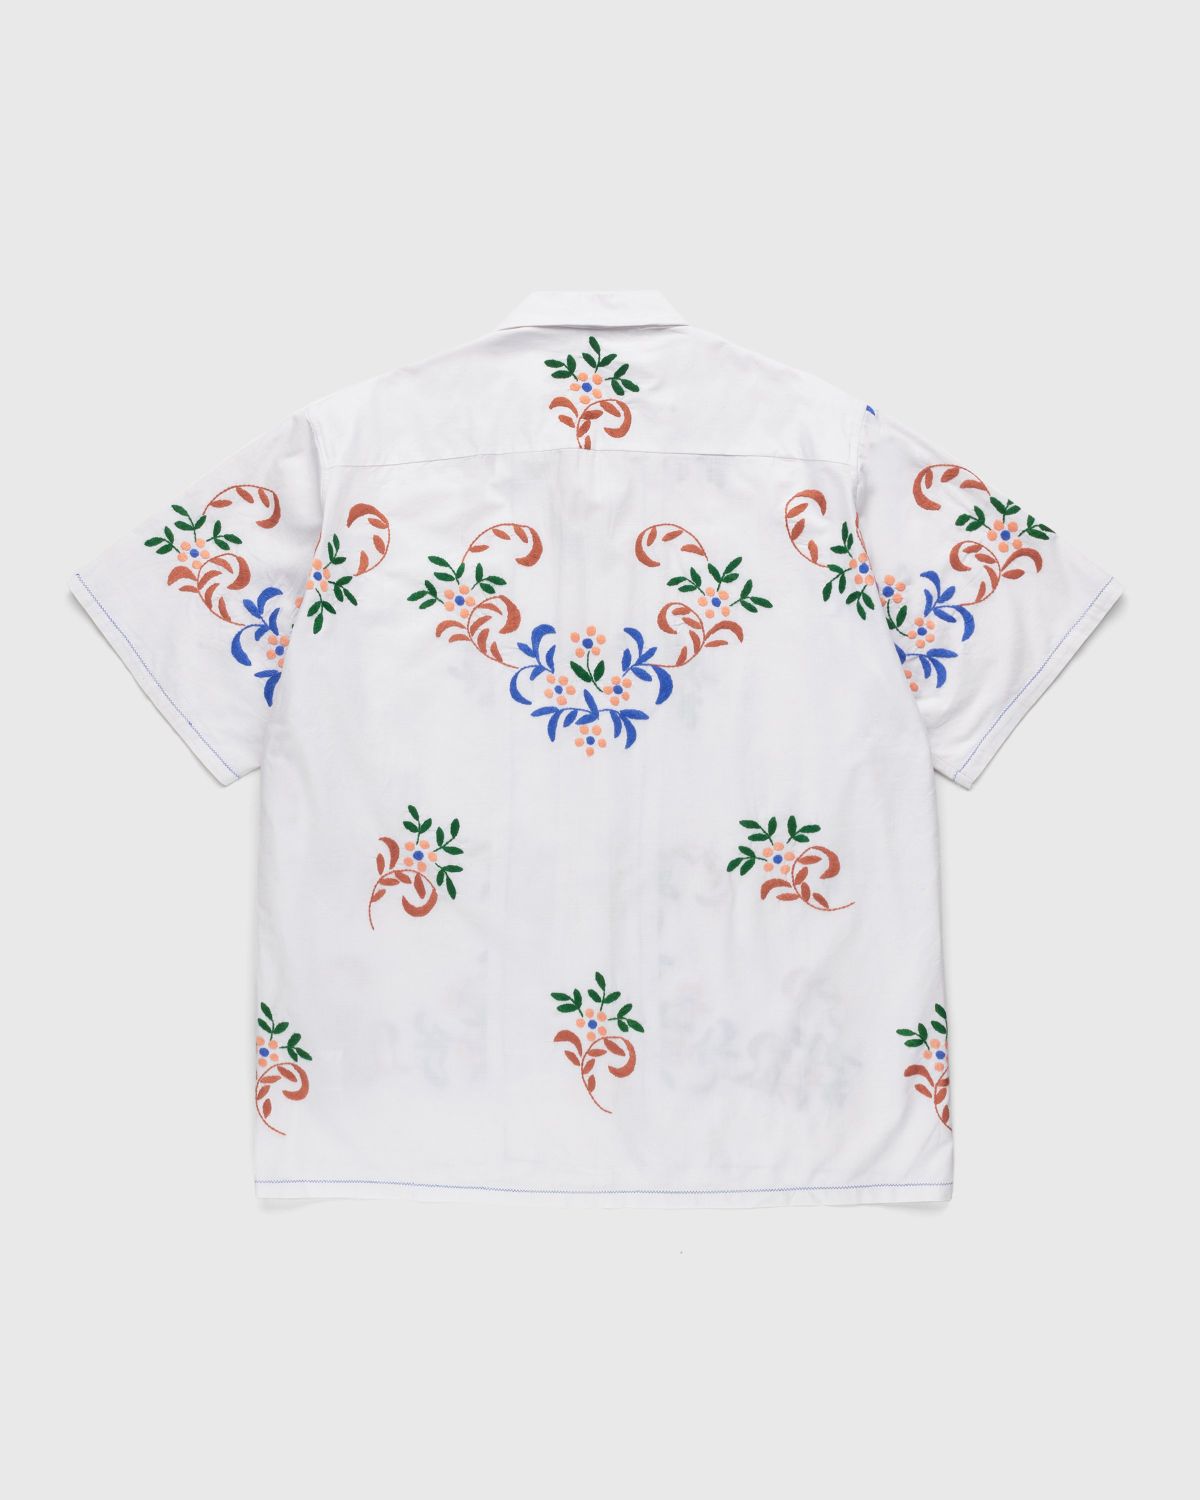 Diomene by Damir Doma – Embroidered Vacation Shirt White/Blue - Shirts - White - Image 2